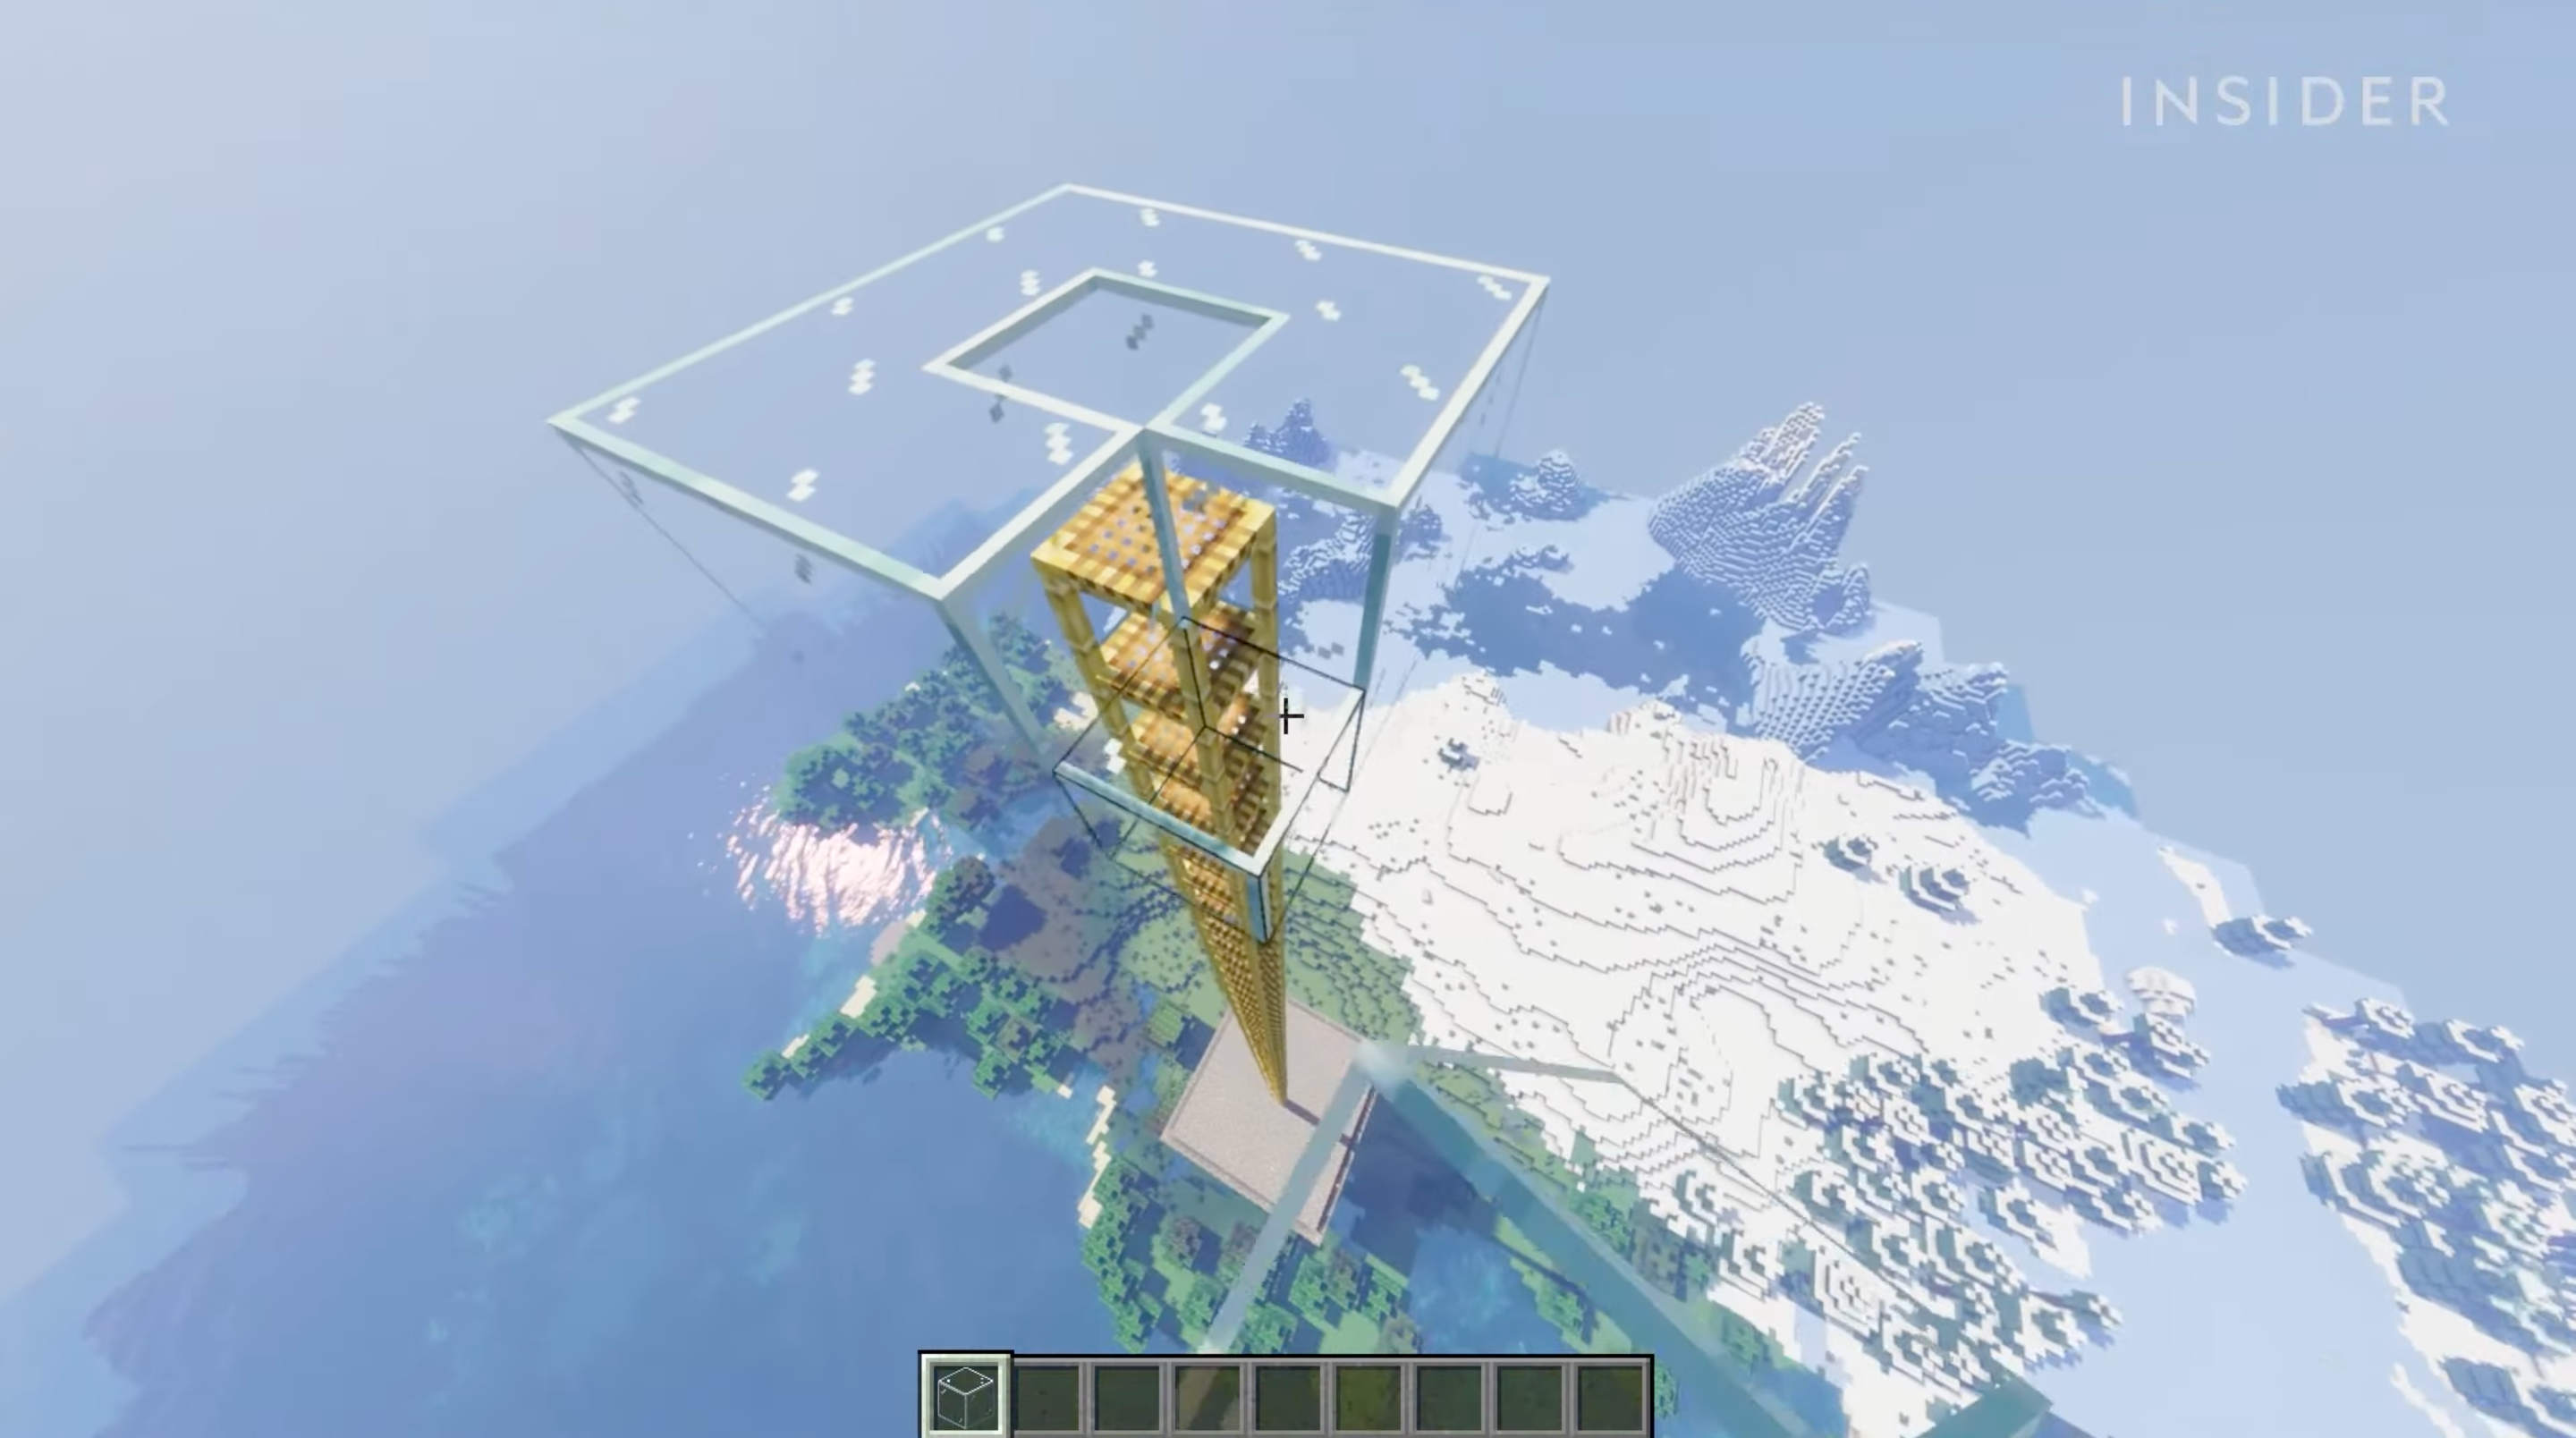 A screenshot from Minecraft, showing an "AFK Room" made out of glass.